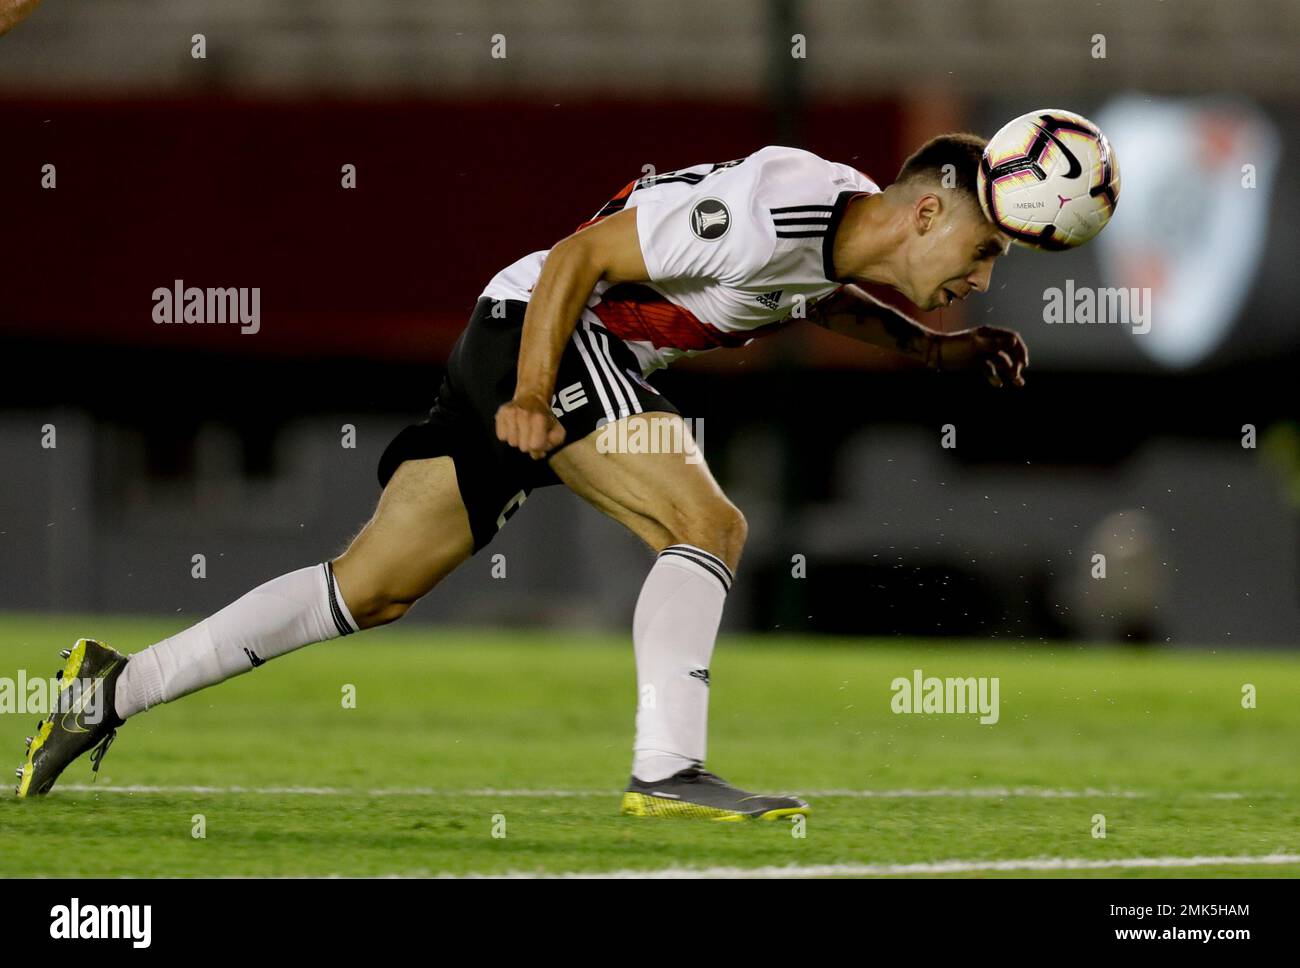 Gonzalo Montiel of Argentina's River Plate heads the ball during a